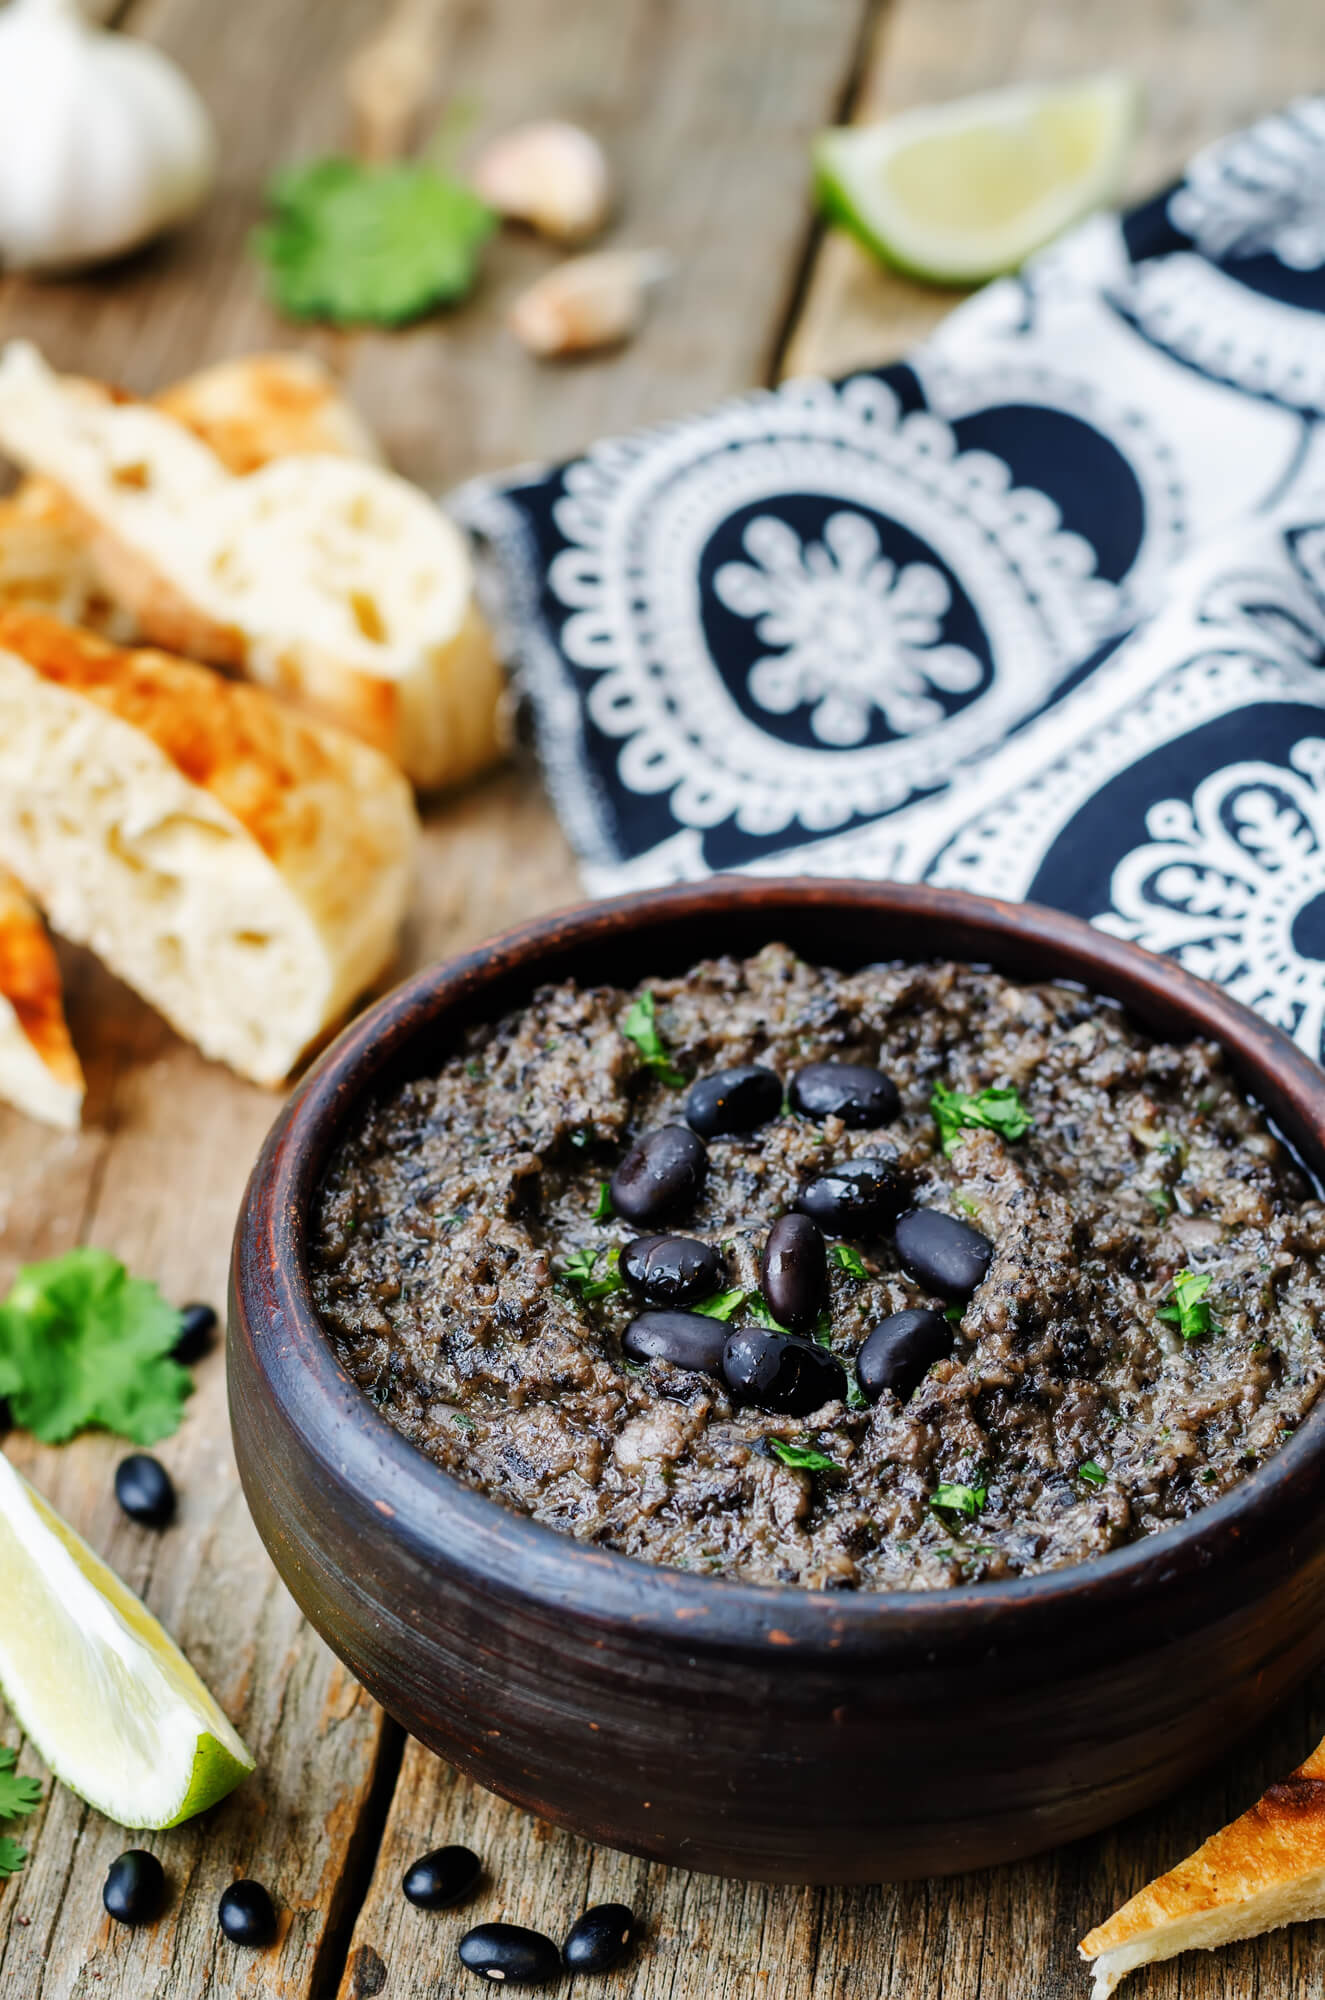 Black Bean Hummus is a wooden bowl with cilantro and garlic.